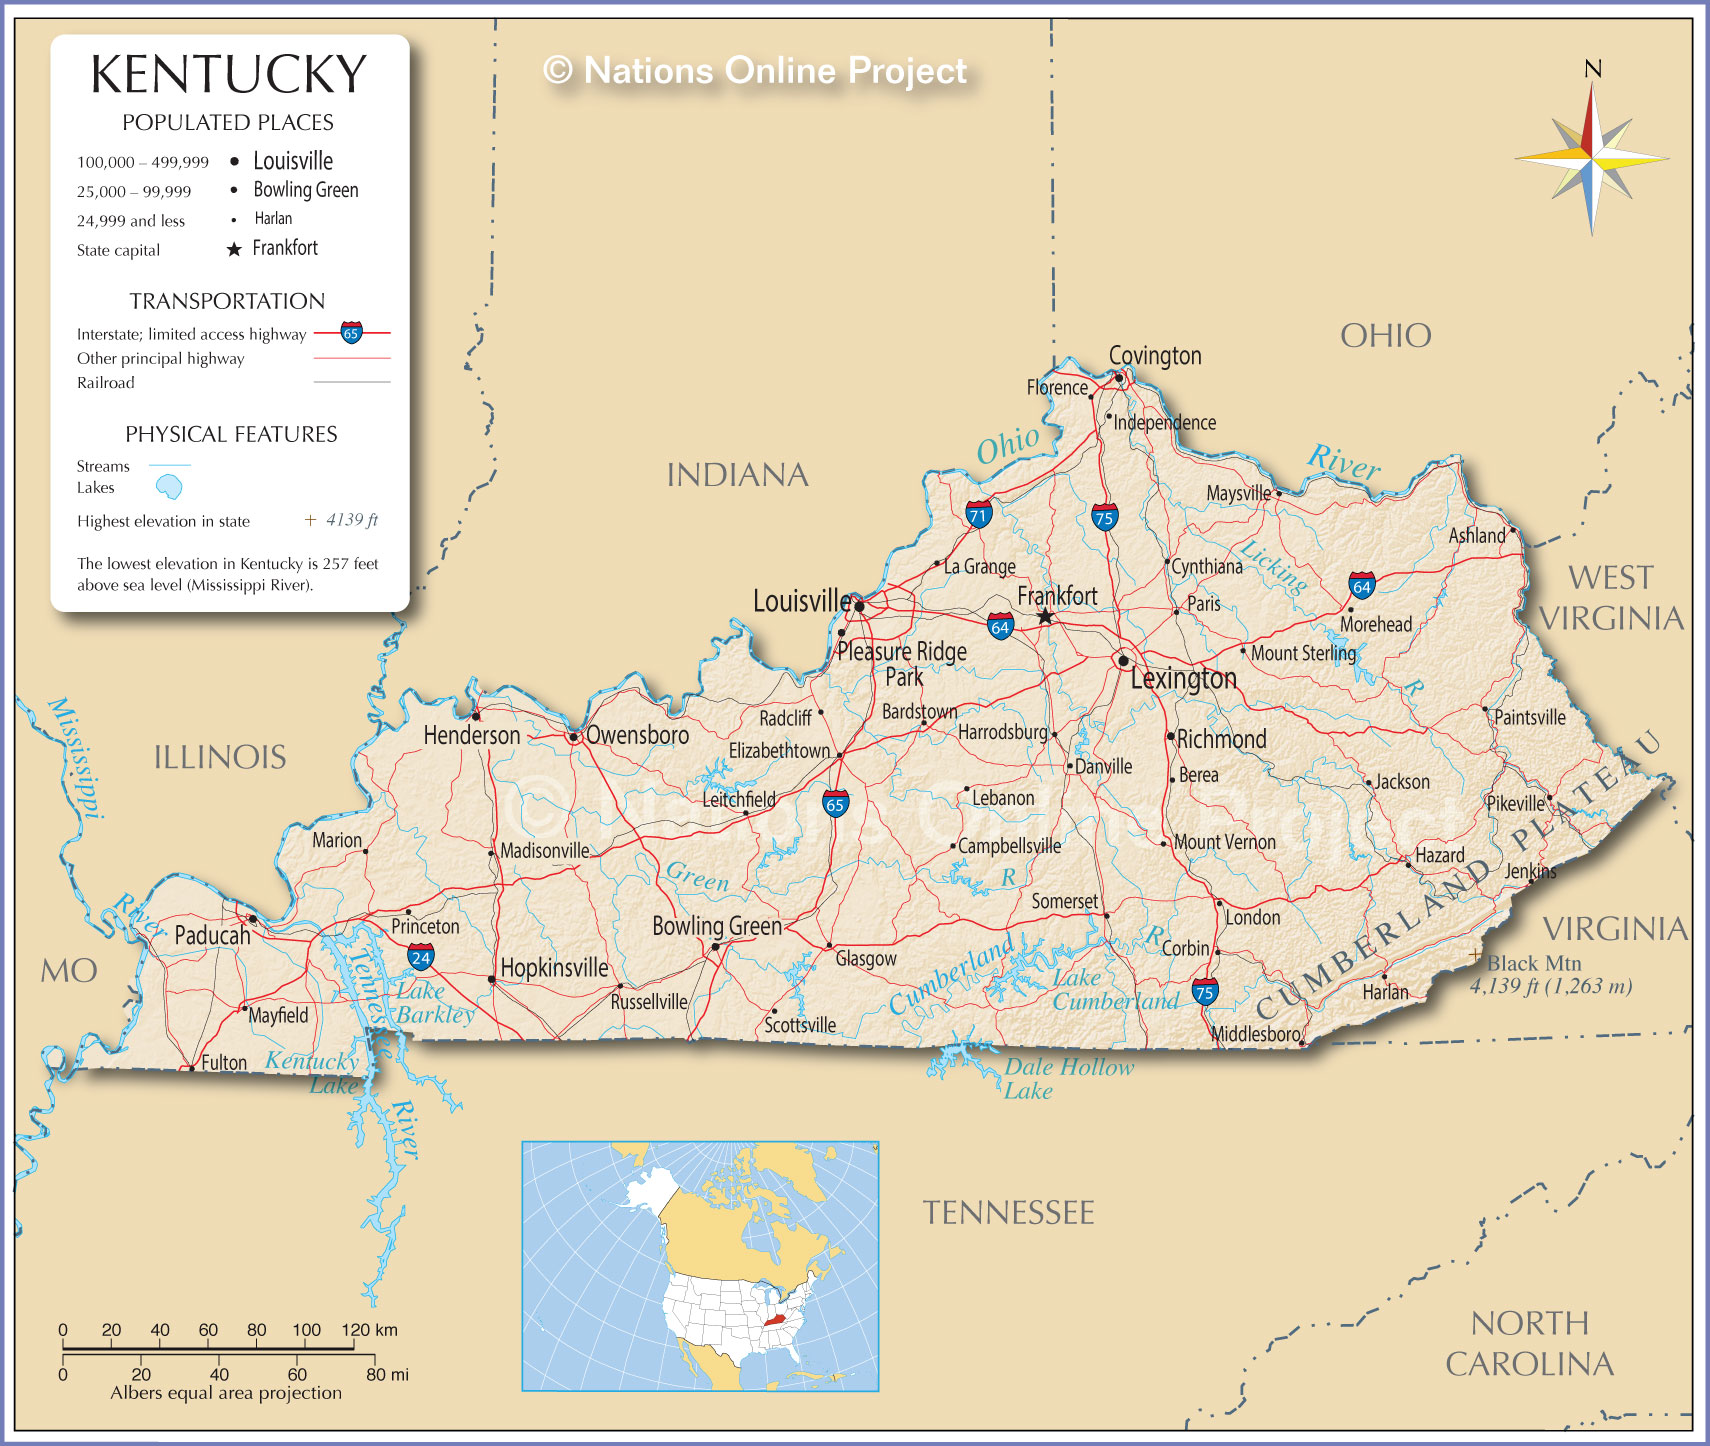 Map of Kentucky from Nations Online Project.